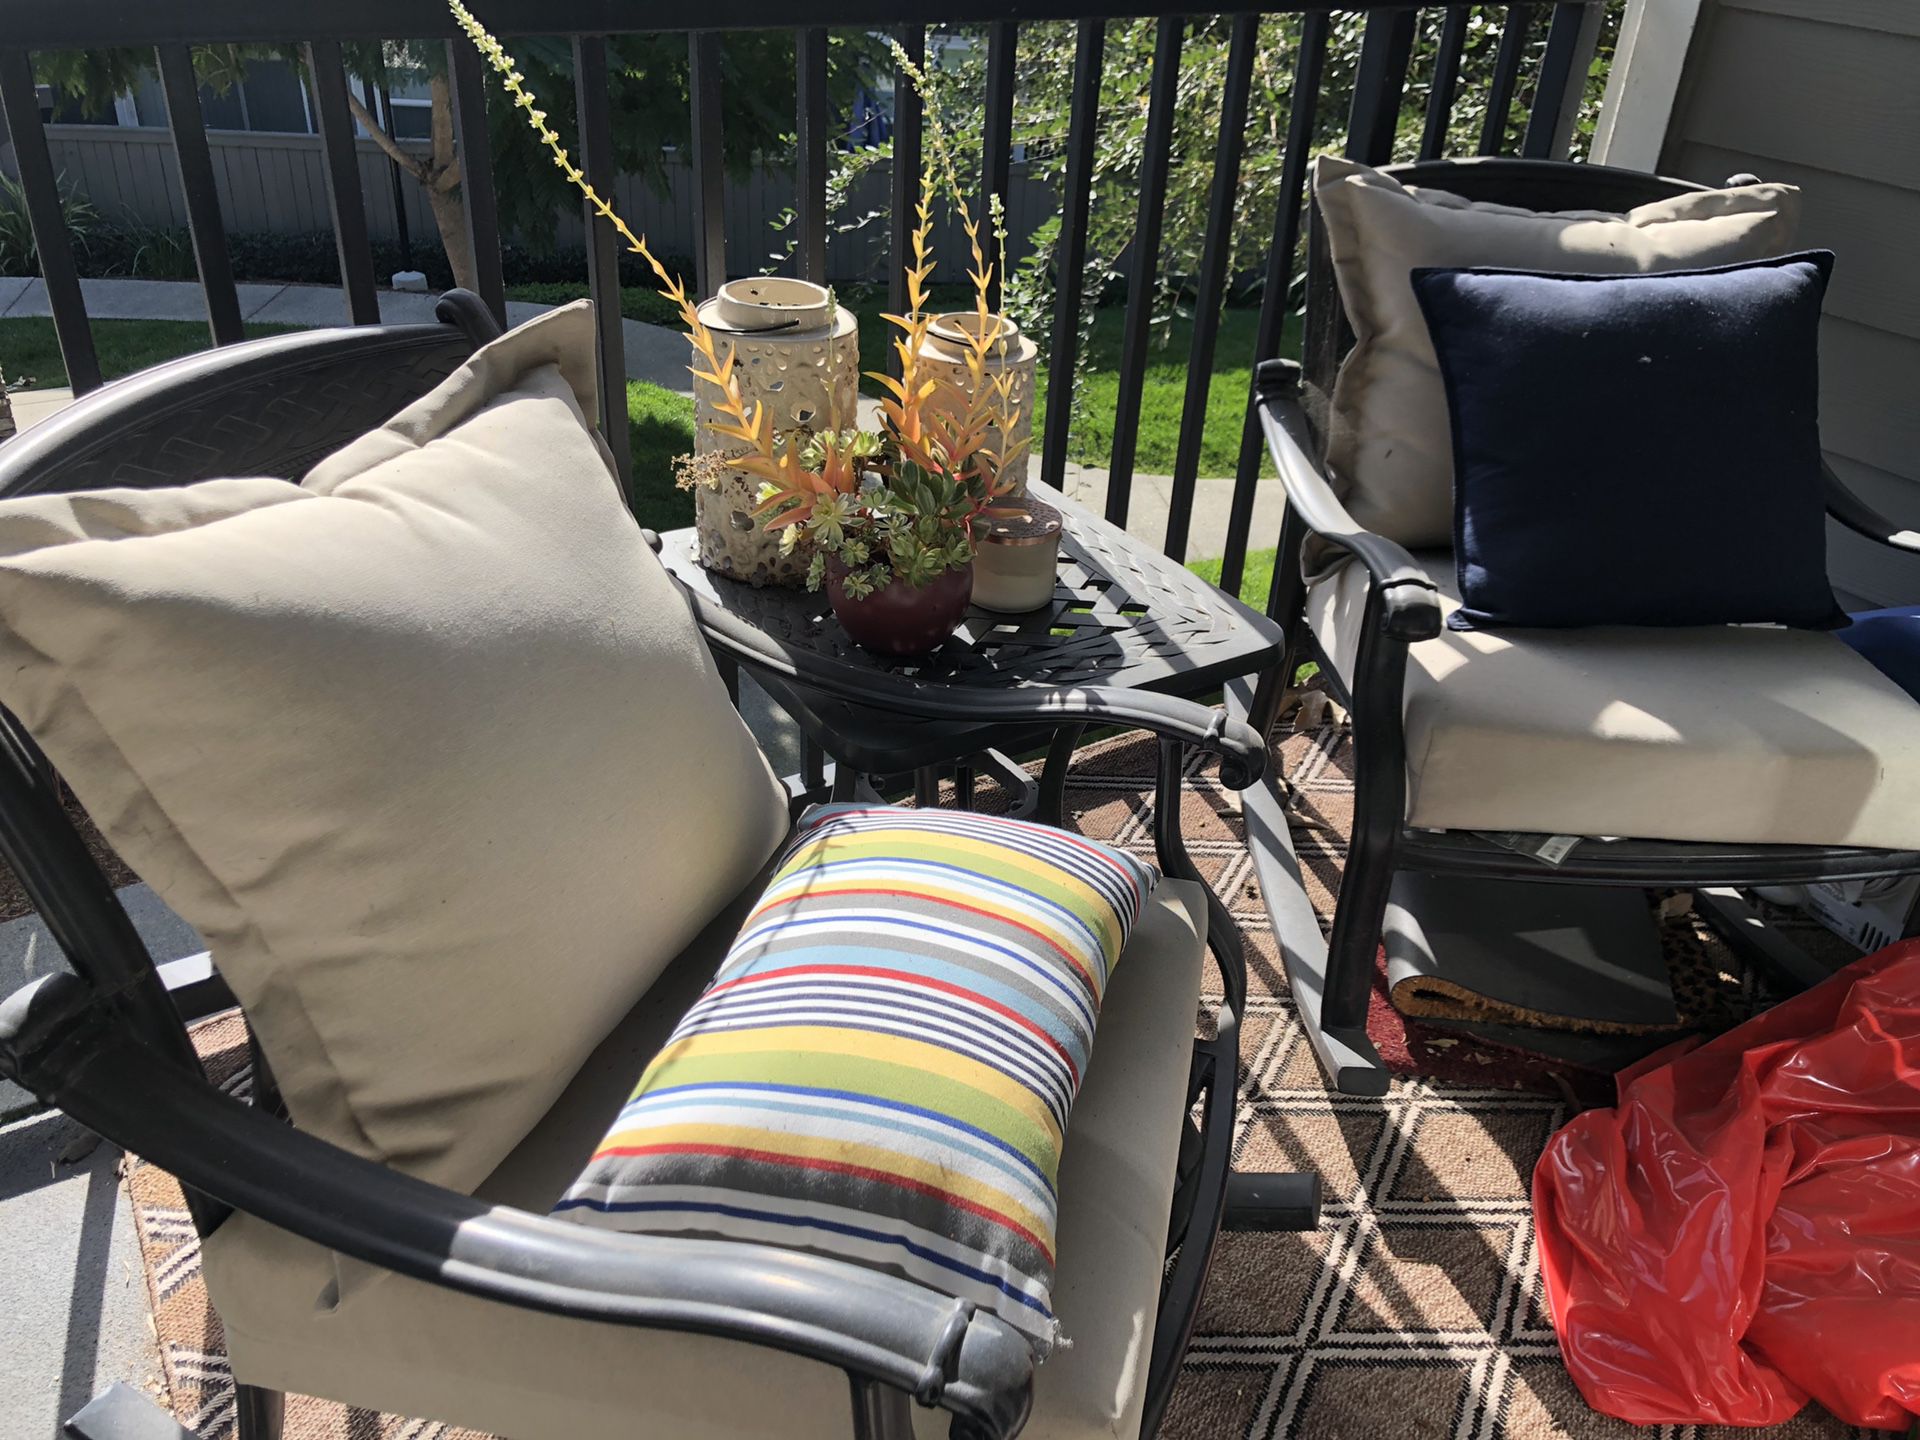 Patio furniture with rug